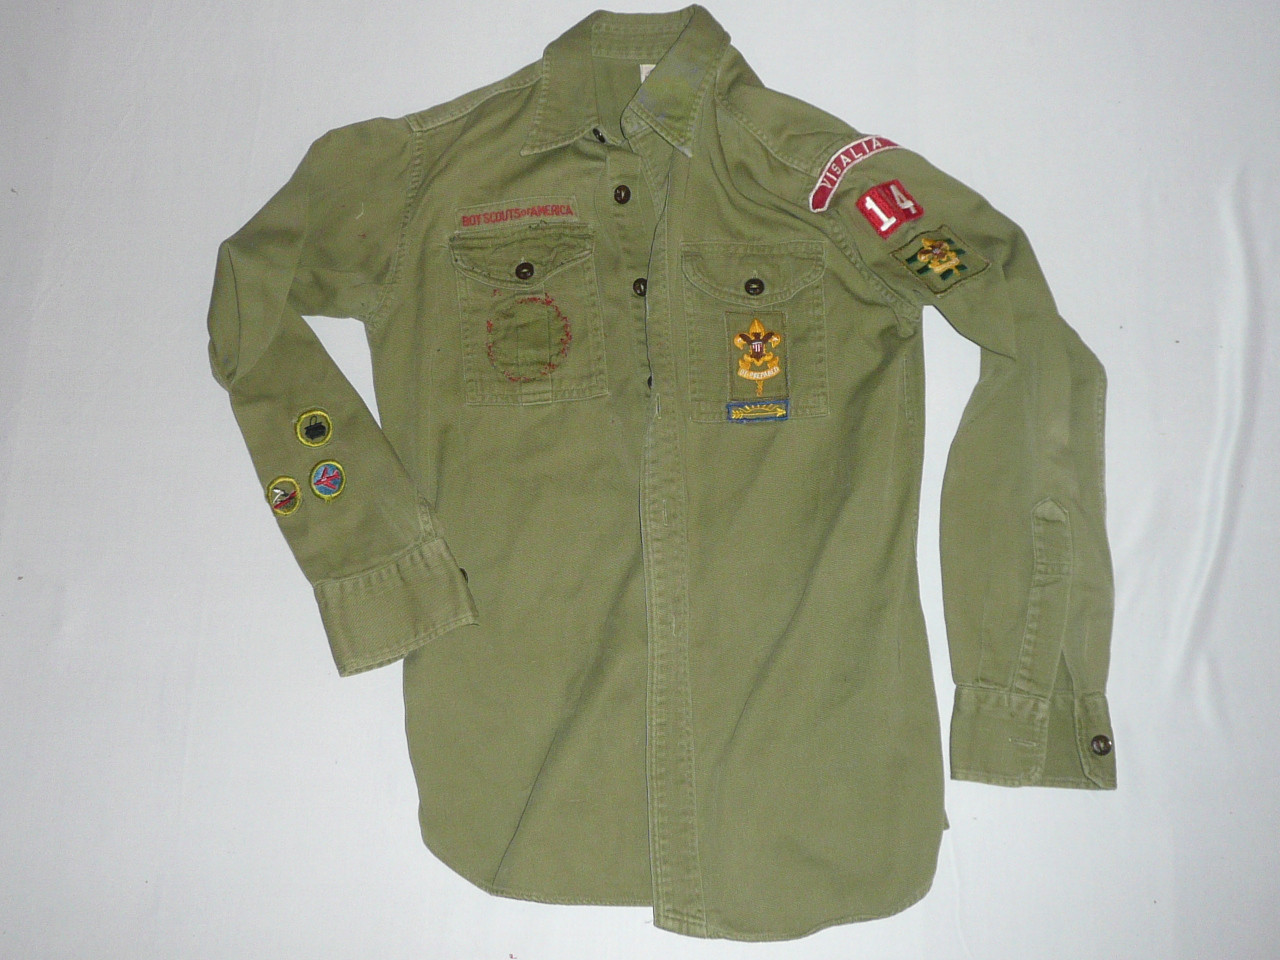 1960's Boy Scout Uniform Shirt with patches and "VISALIA" RWS, 18" Chest and 28" Length, #FB109